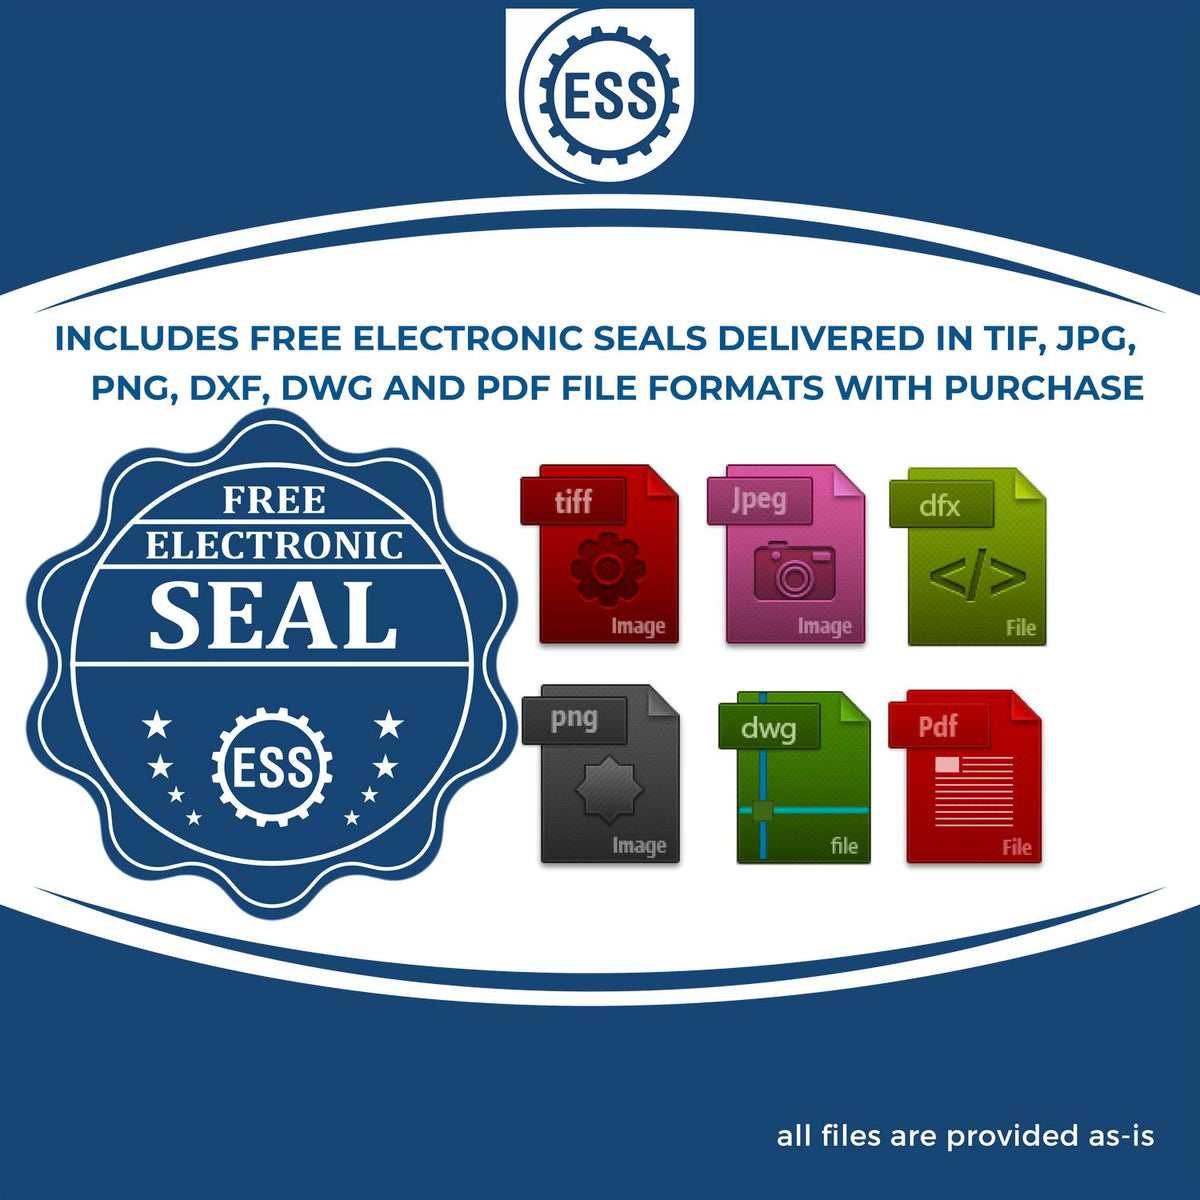 An infographic for the free electronic seal for the Gift Vermont Engineer Seal illustrating the different file type icons such as DXF, DWG, TIF, JPG and PNG.